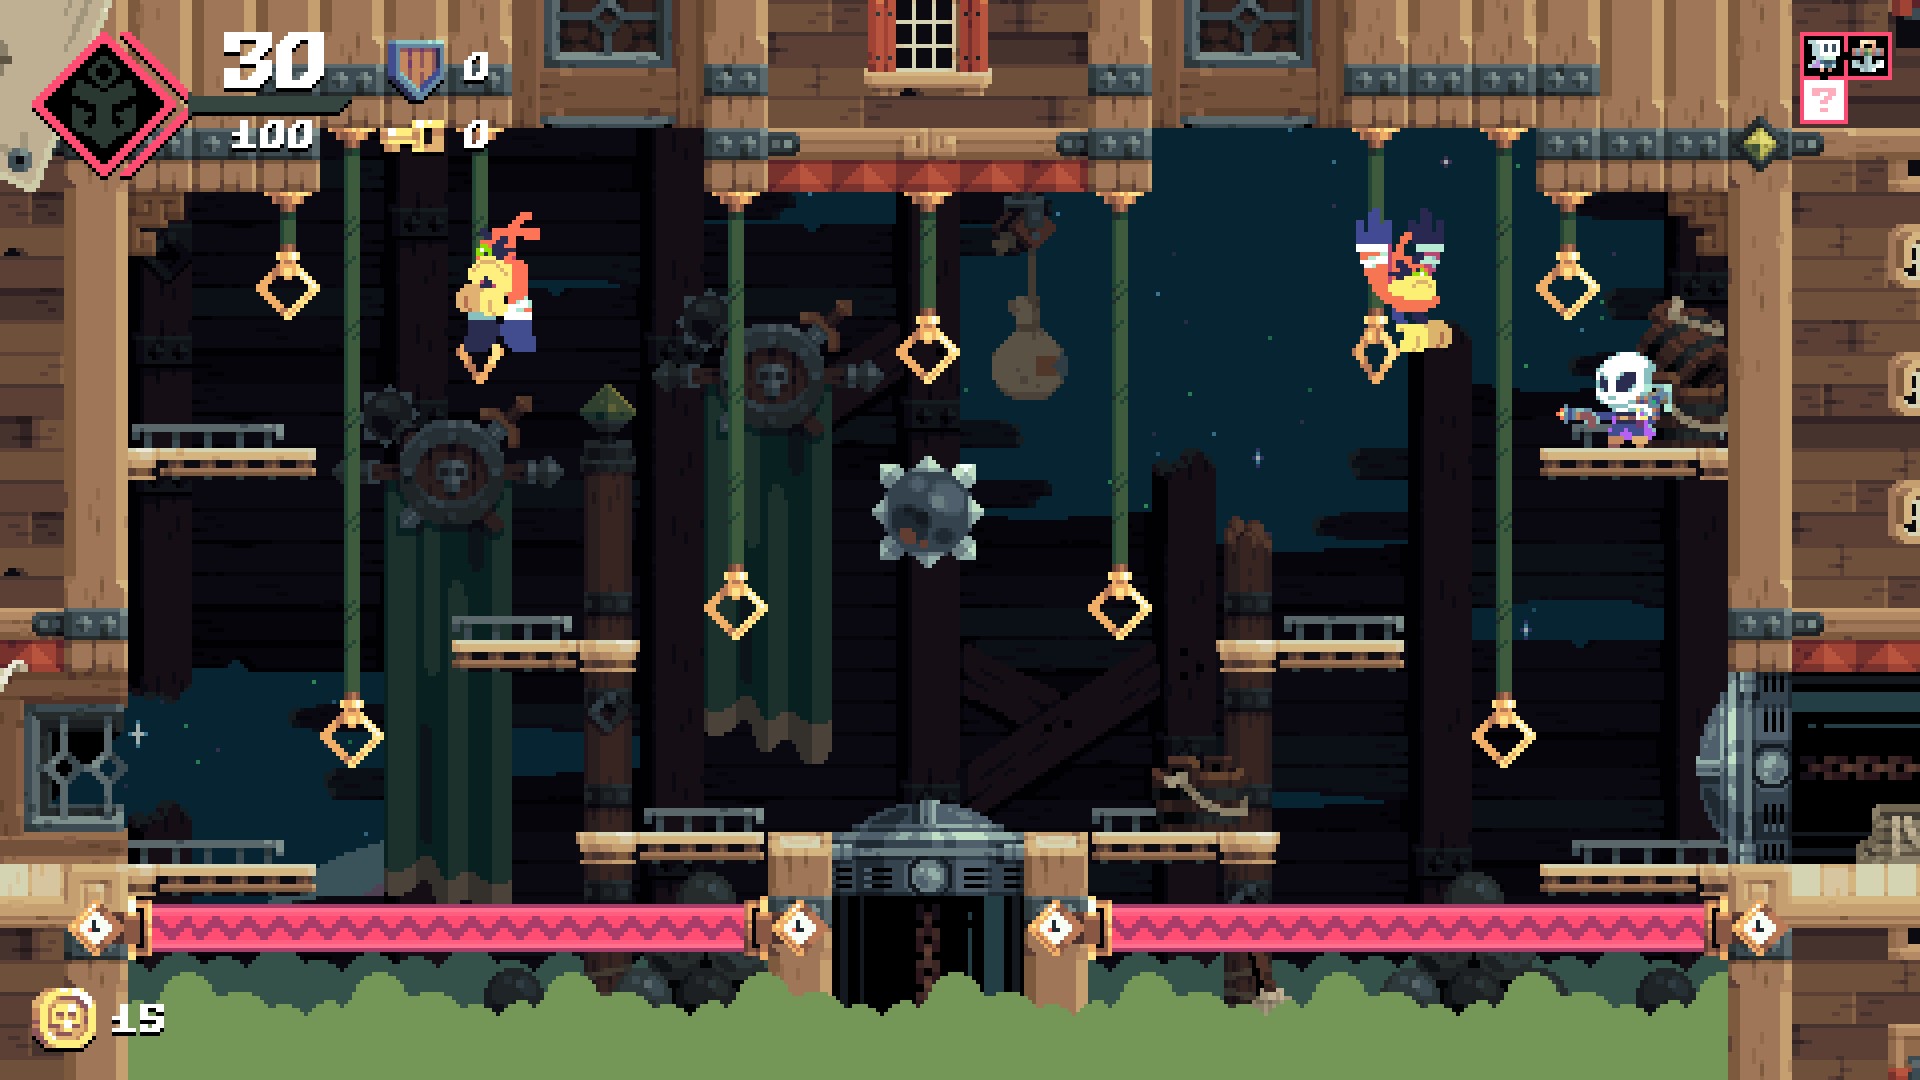 Flinthook Is A Tough But Fair Game About A Space Pirate